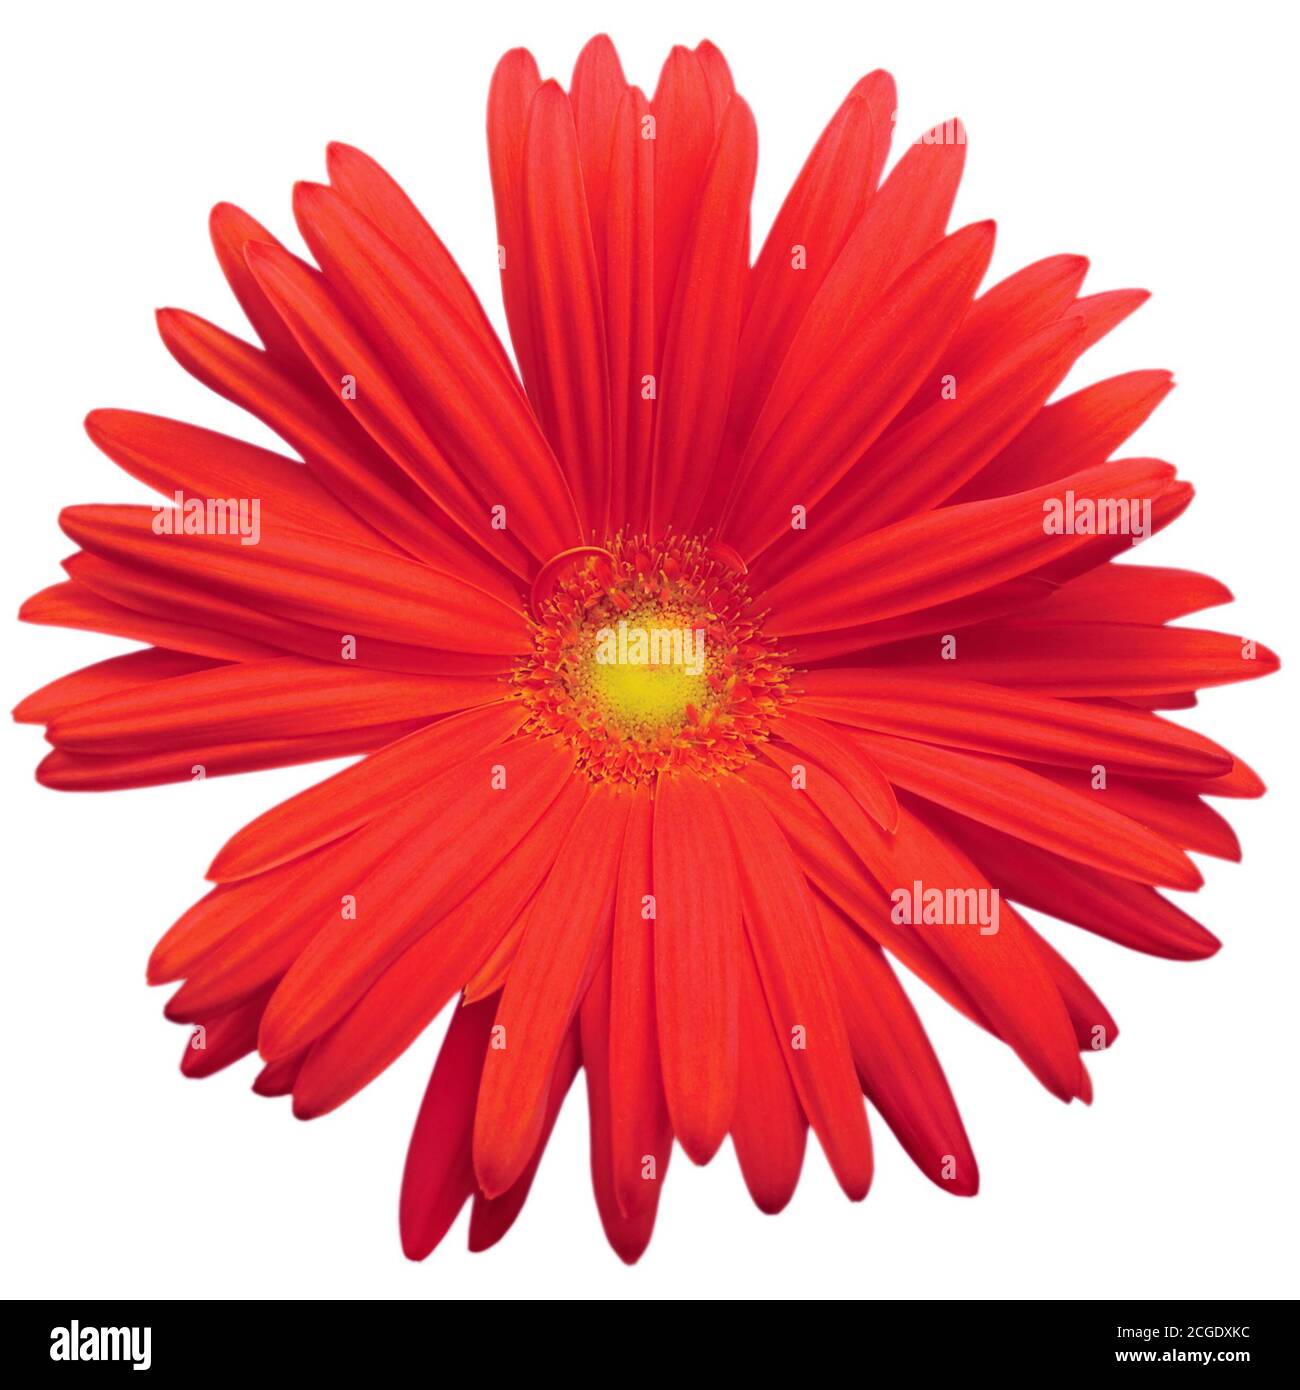 Red gerbera daisy flower in full bloom, blooming head petals top view, isolated large detailed macro flat lay closeup dew drops detail, water droplets Stock Photo